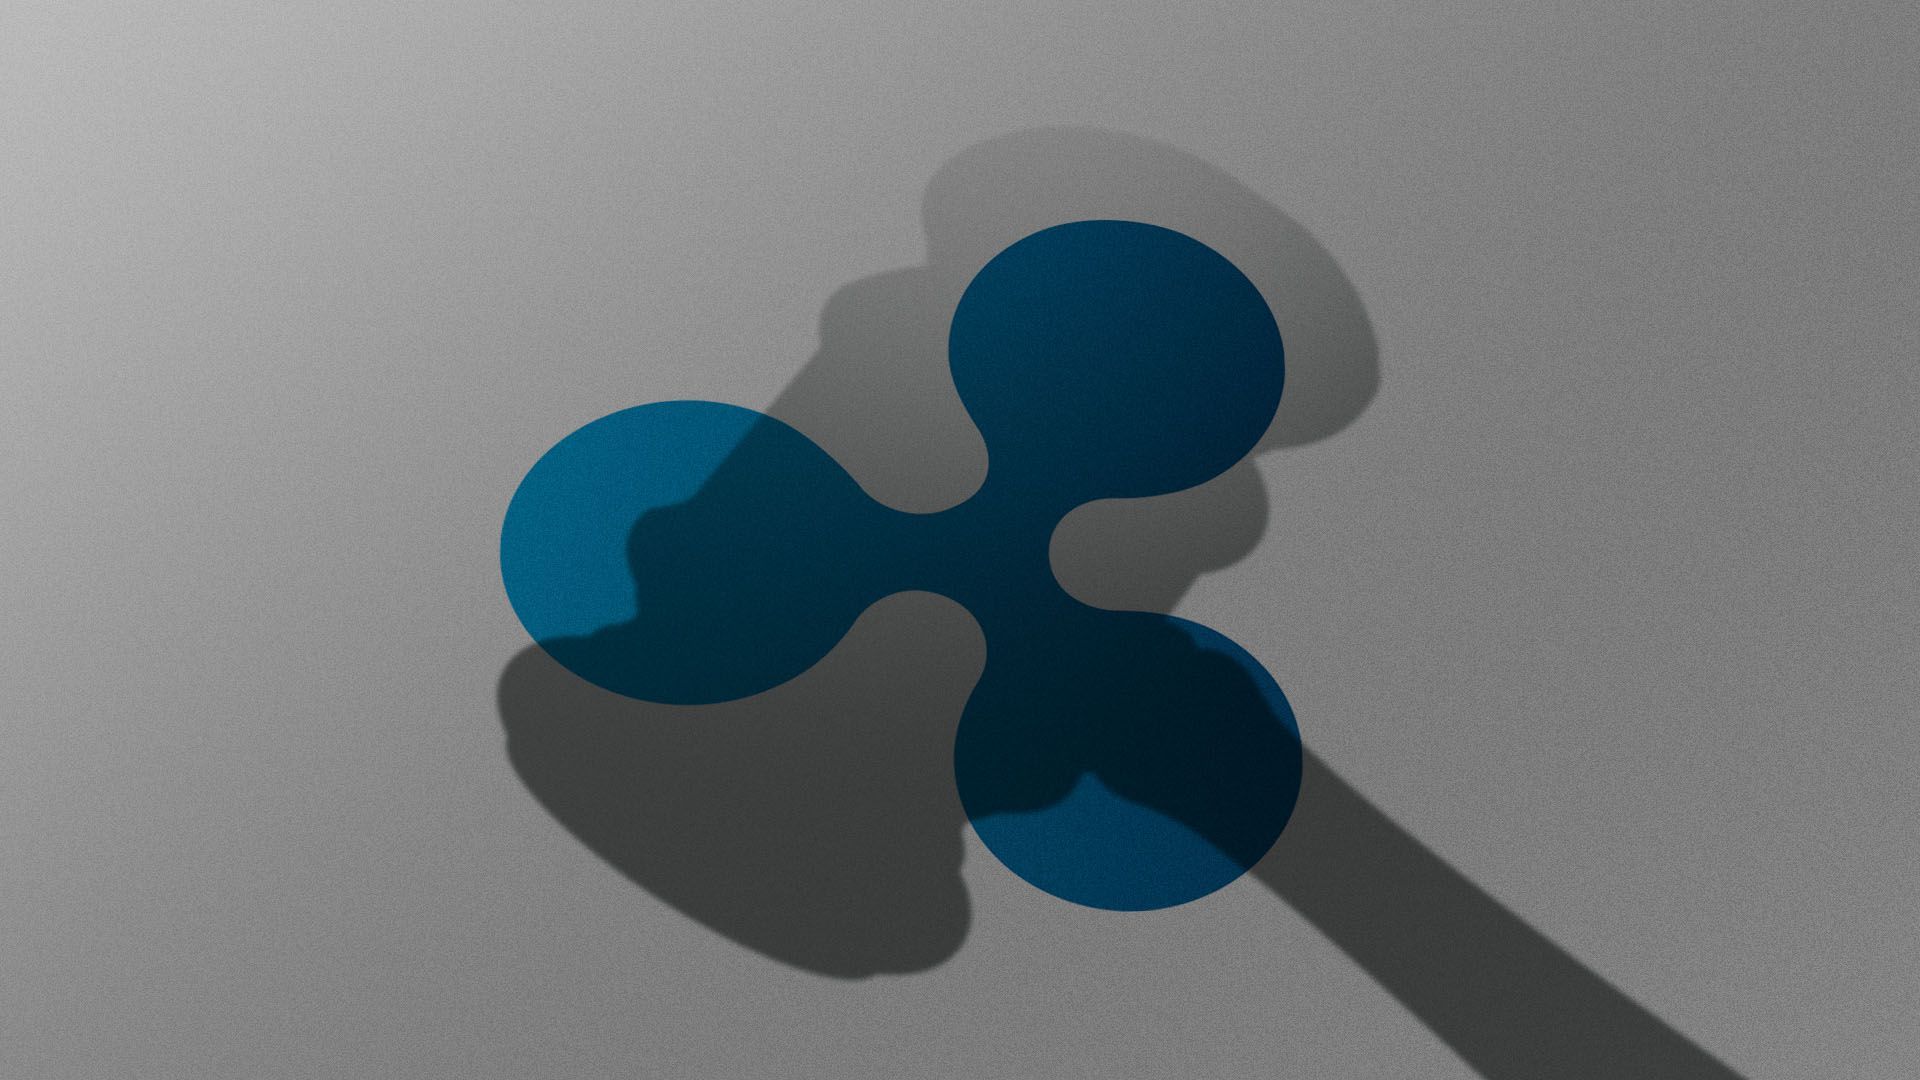 Illustration of the shadow of a gavel hovering over the Ripple logo